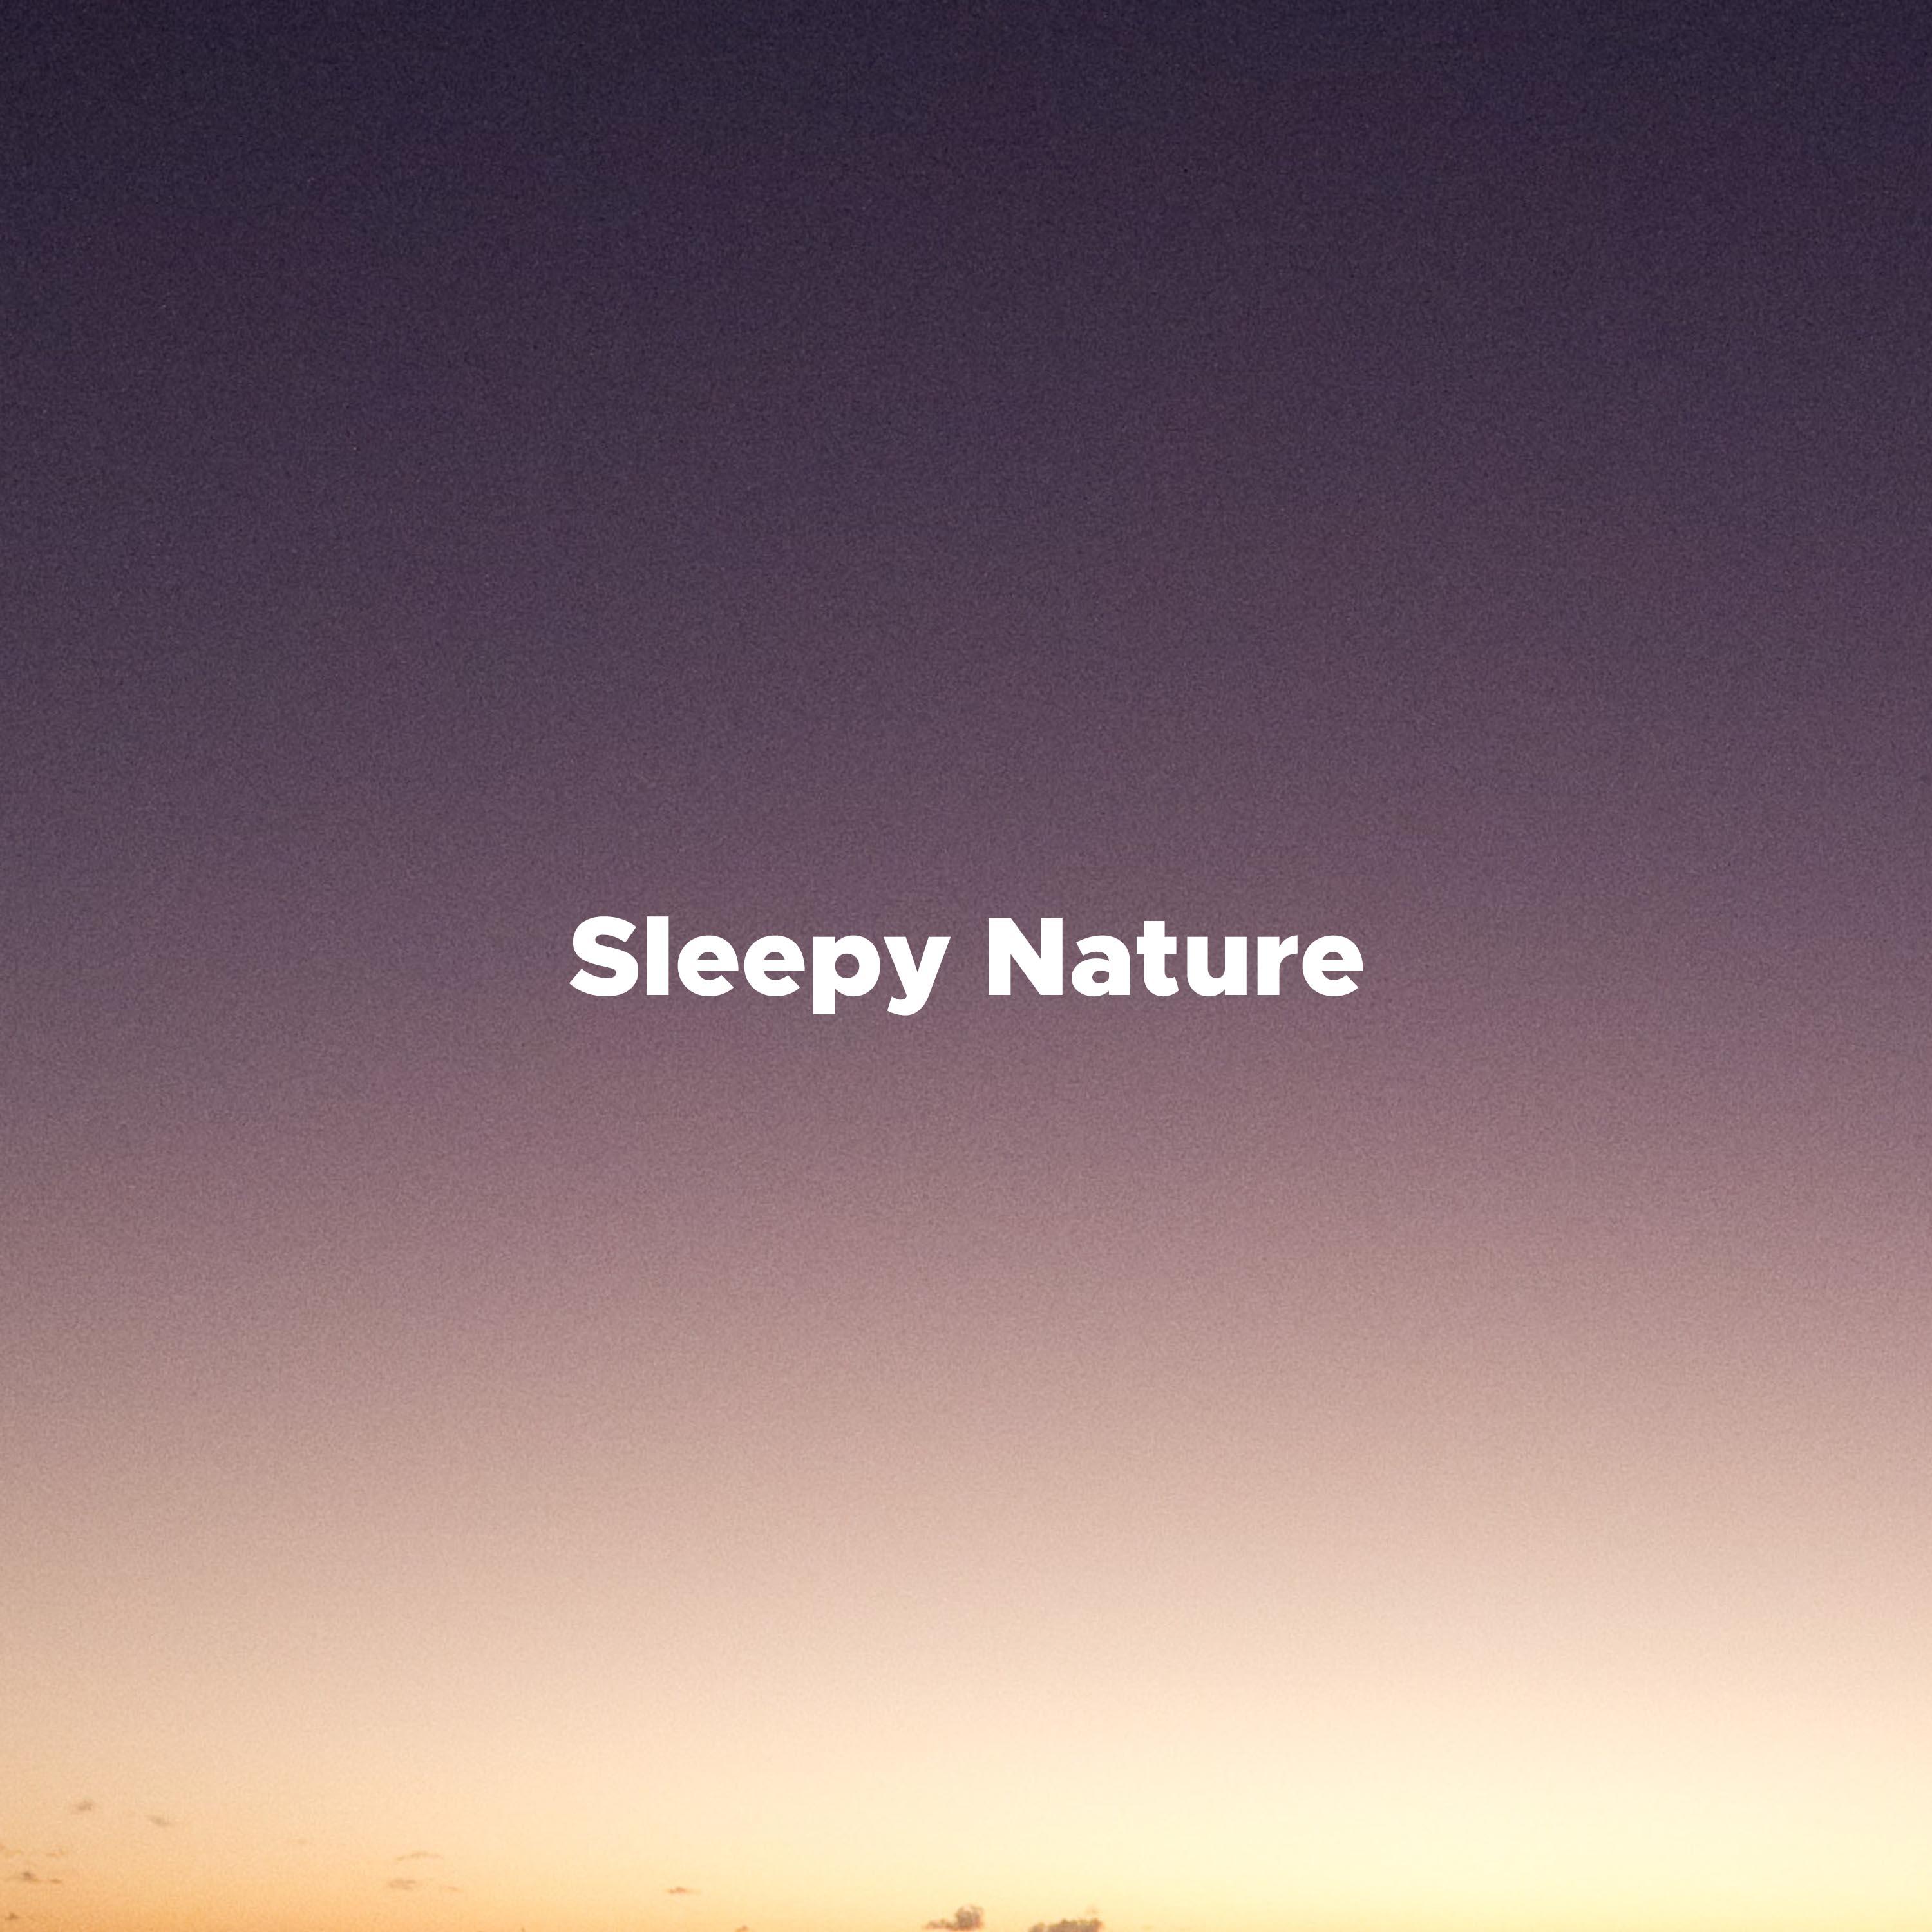 Sleepy Nature - Relaxing Music for Massage, Spa, Yoga, Stress Relief, Meditation with Thunderstorm, Nature Sounds, Sleep Music